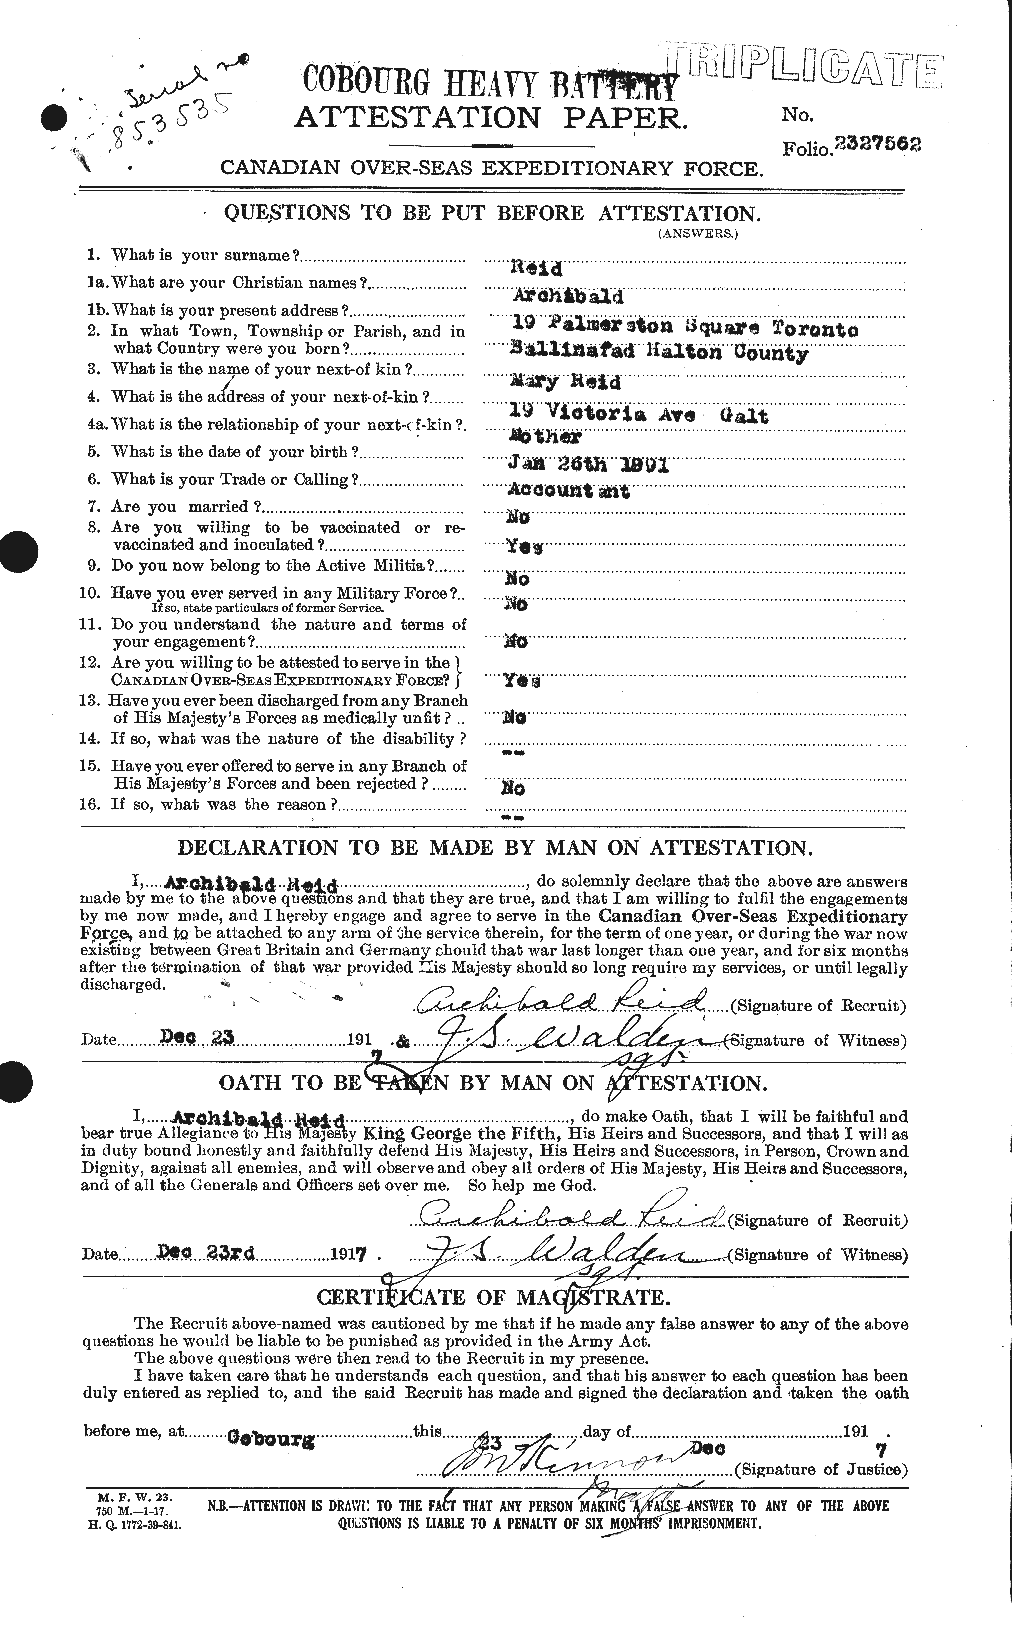 Personnel Records of the First World War - CEF 597831a